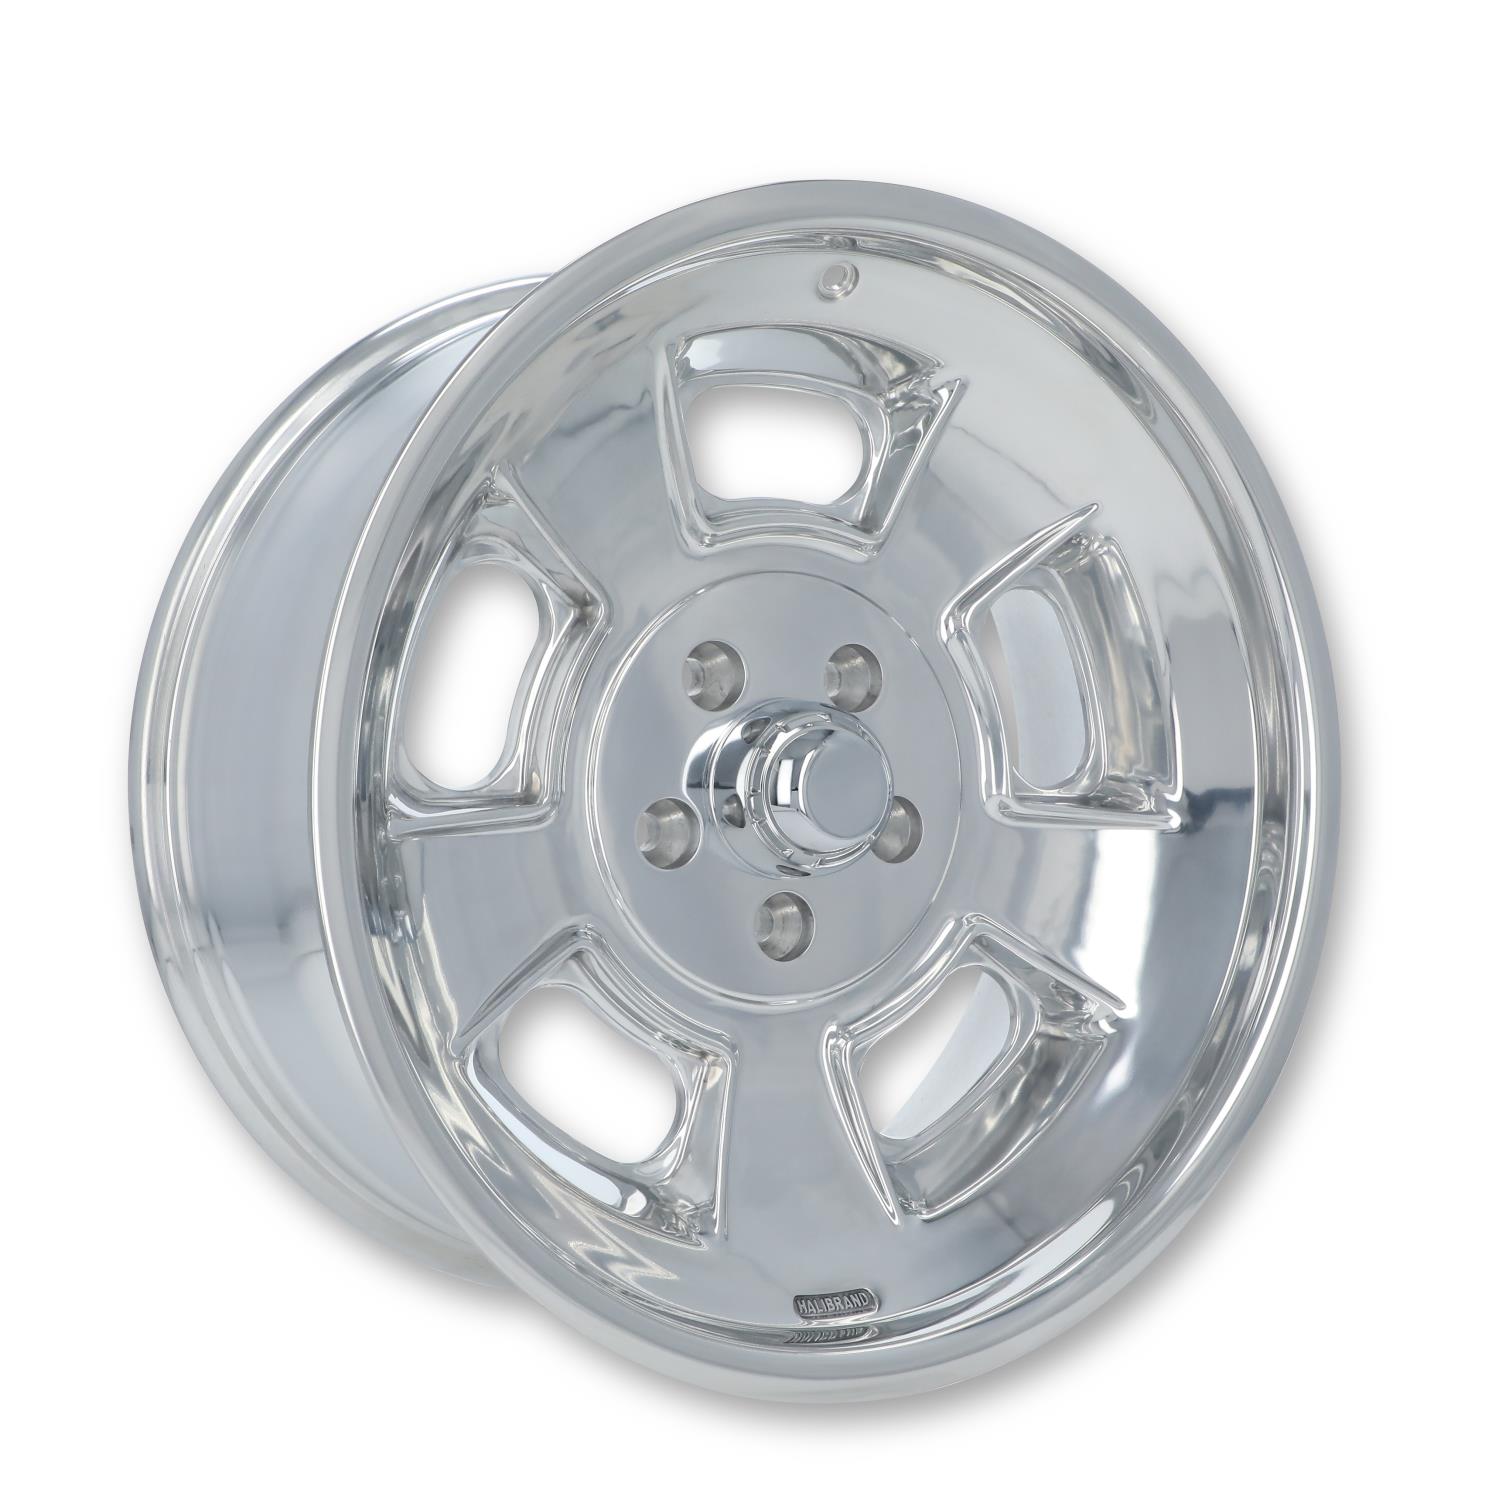 Sprint Front Wheel, Size: 19x8.5", Bolt Pattern: 5x5", Backspace: 4.5" [Polished - No Clearcoat]